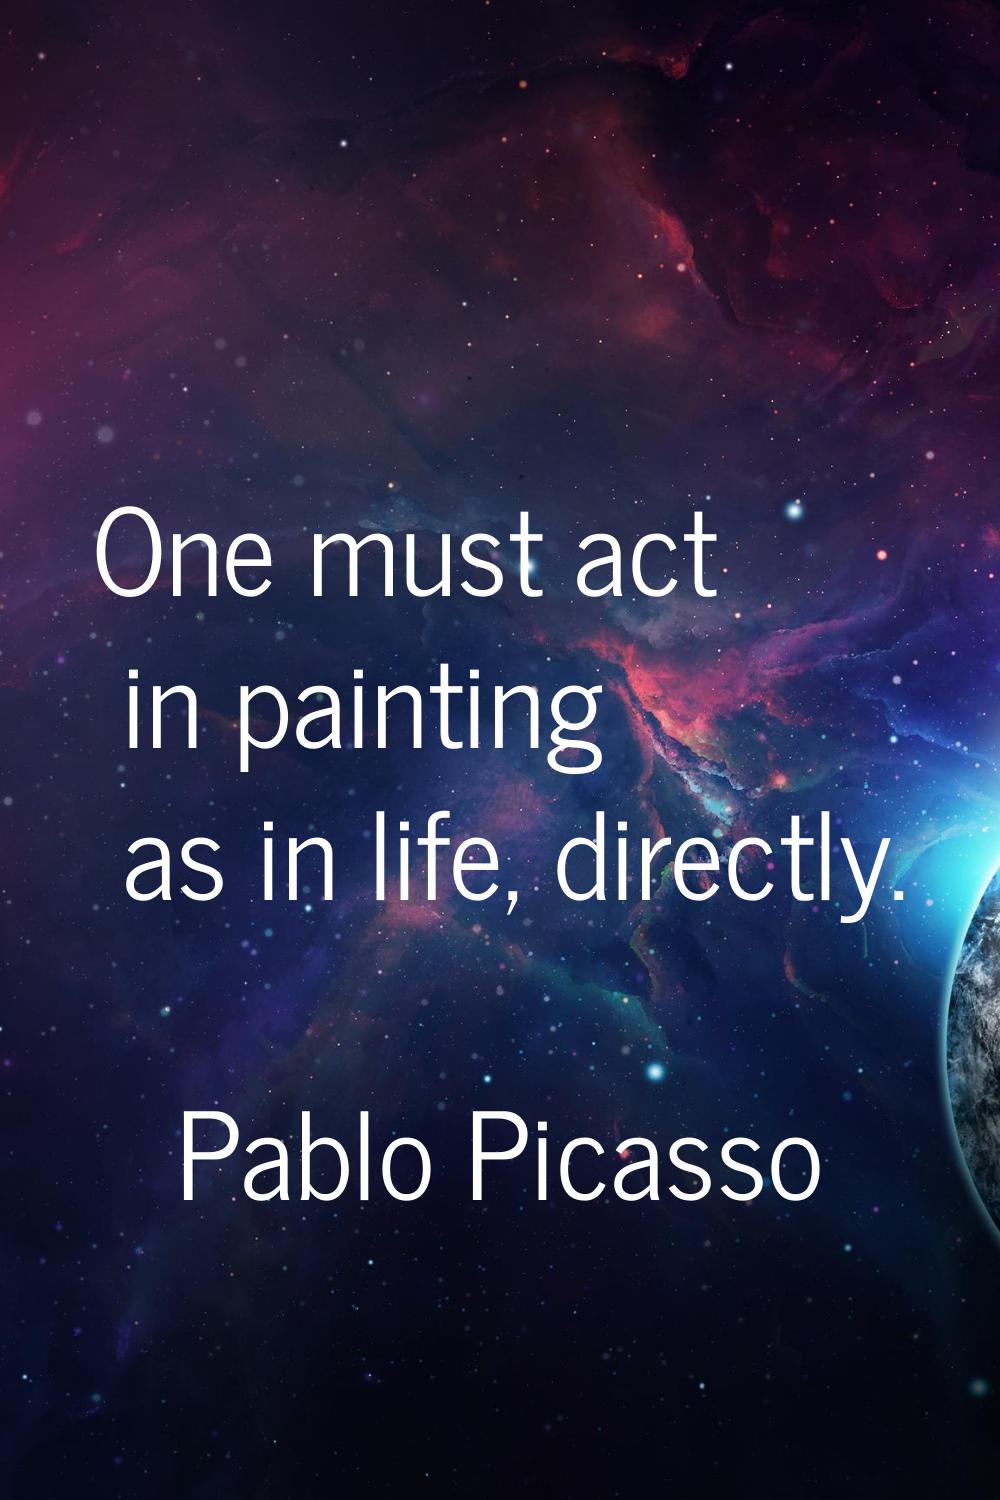 One must act in painting as in life, directly.